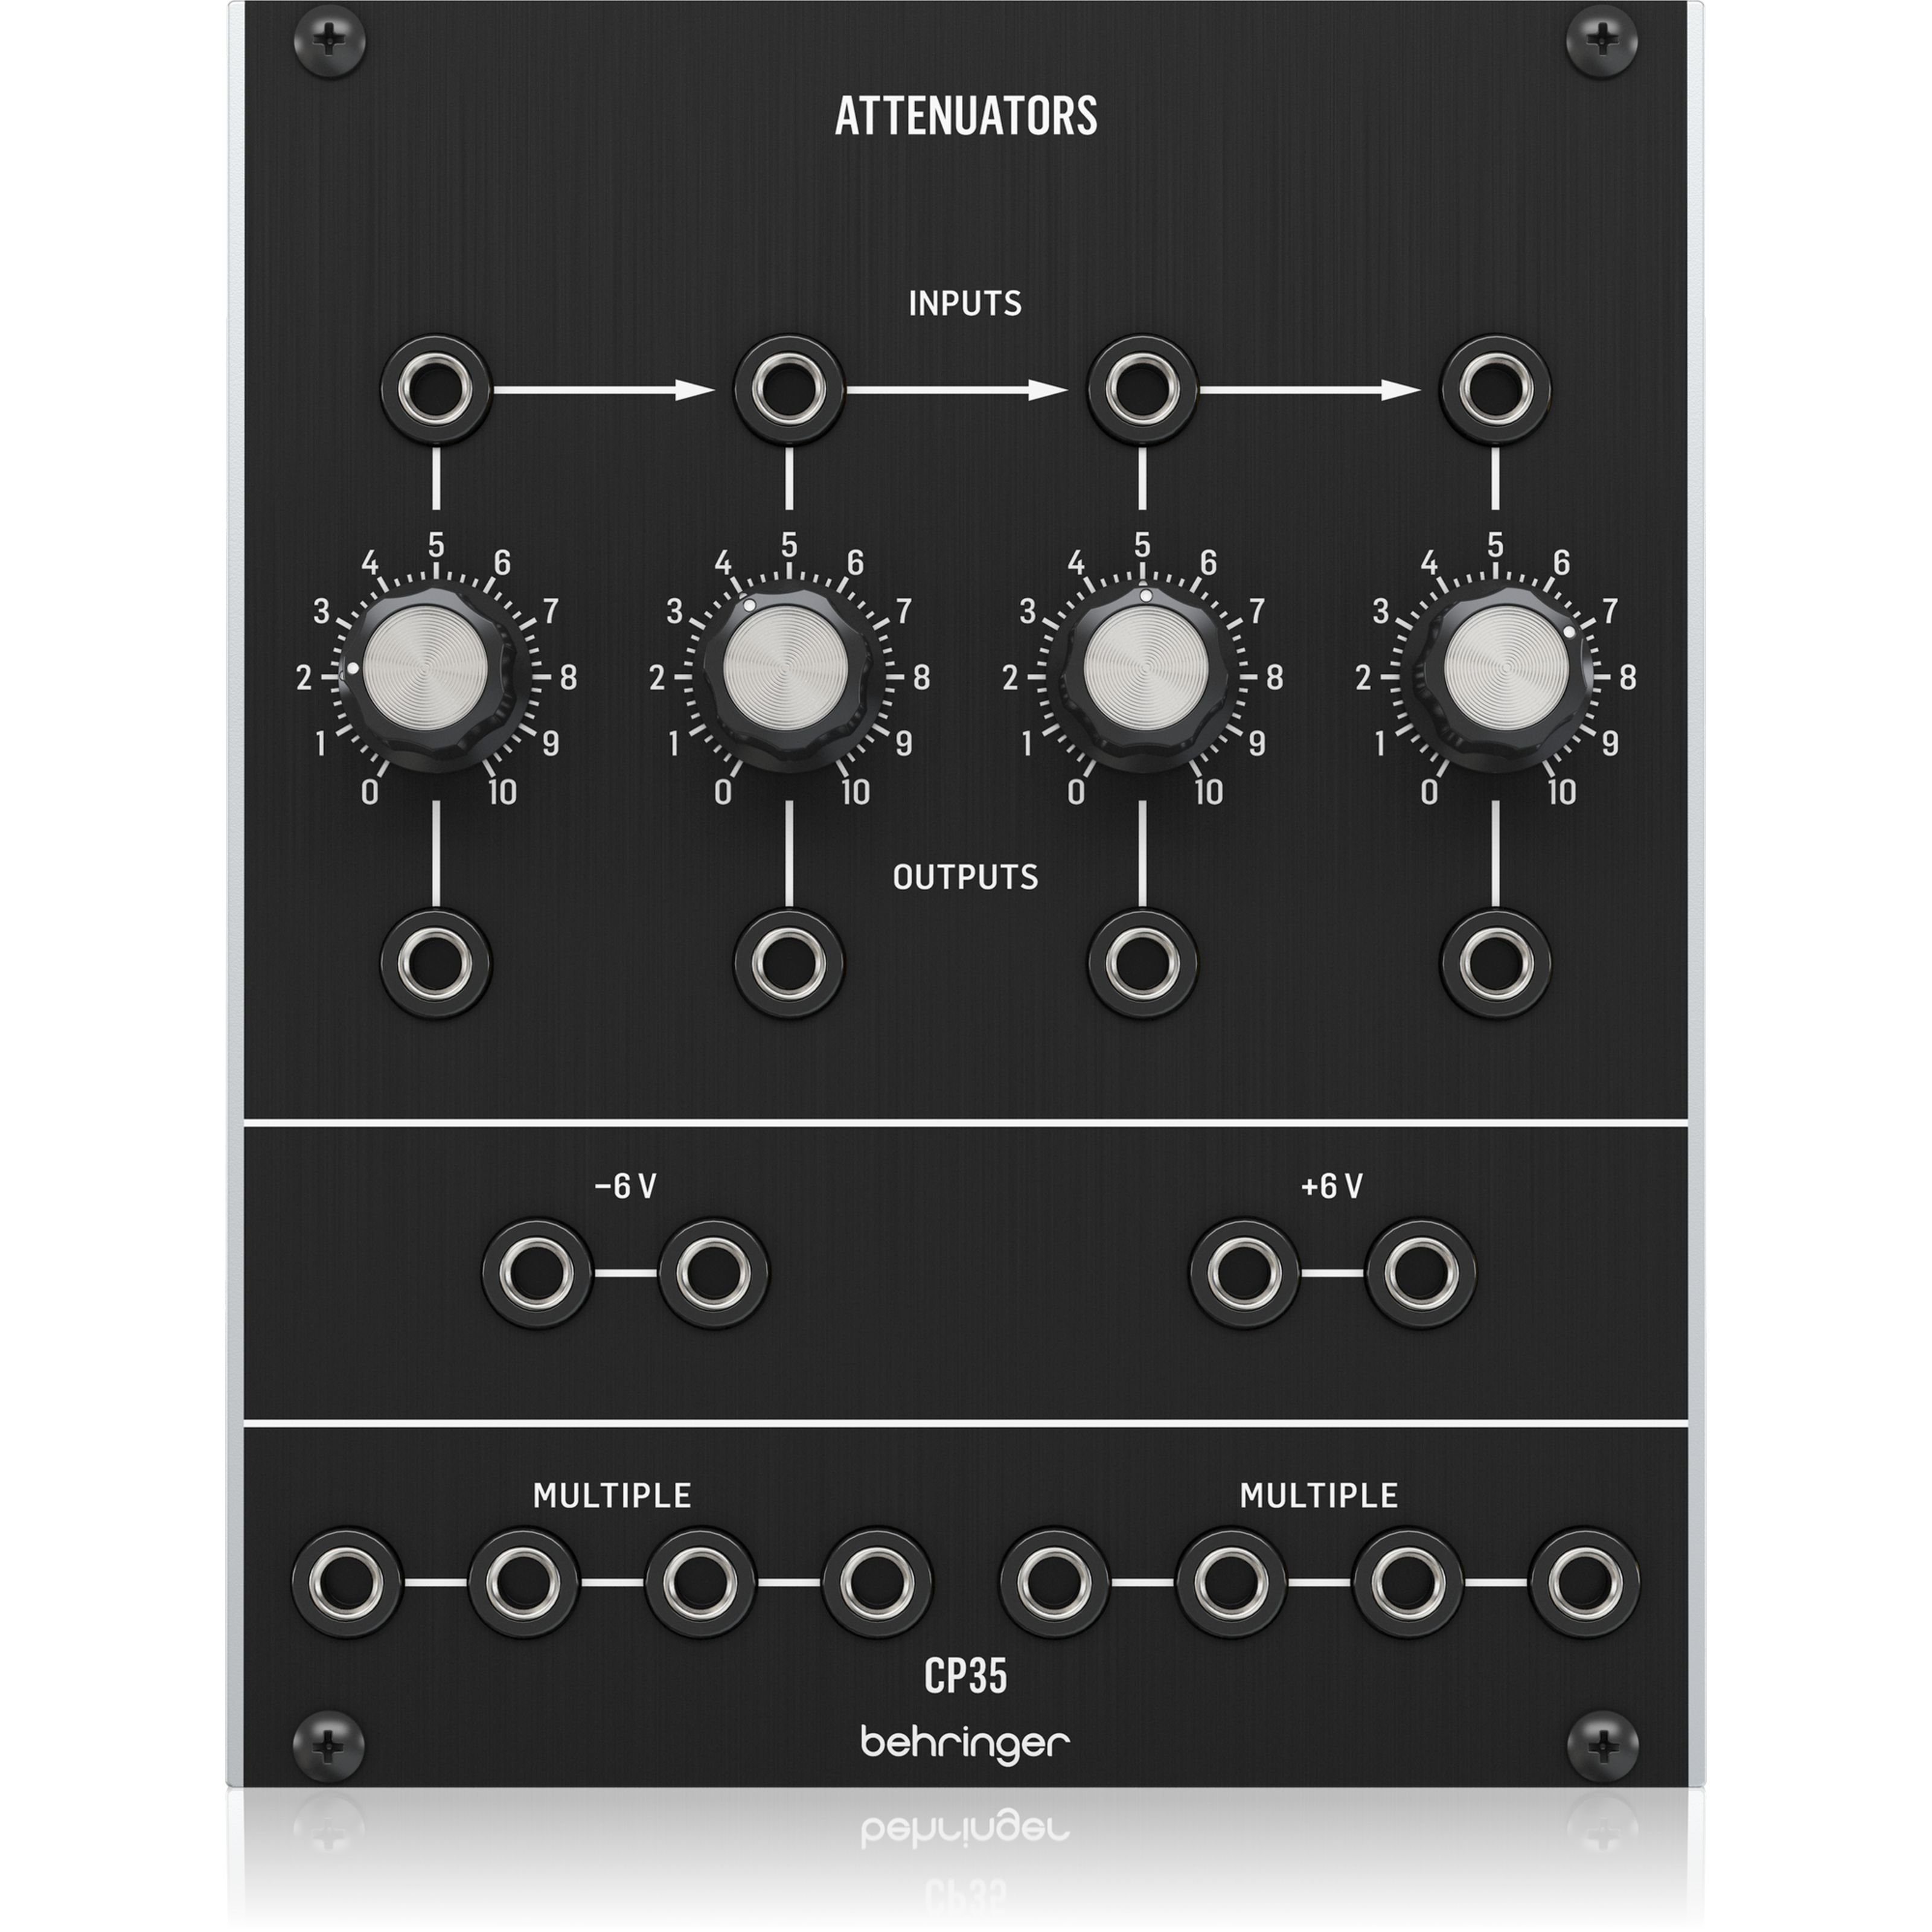 Behringer Synthesizer (CP35 Attenuators, Modular Synthesizer, Attenuator-Module), CP35 Attenuators - Attenuator Modular Synthesizer